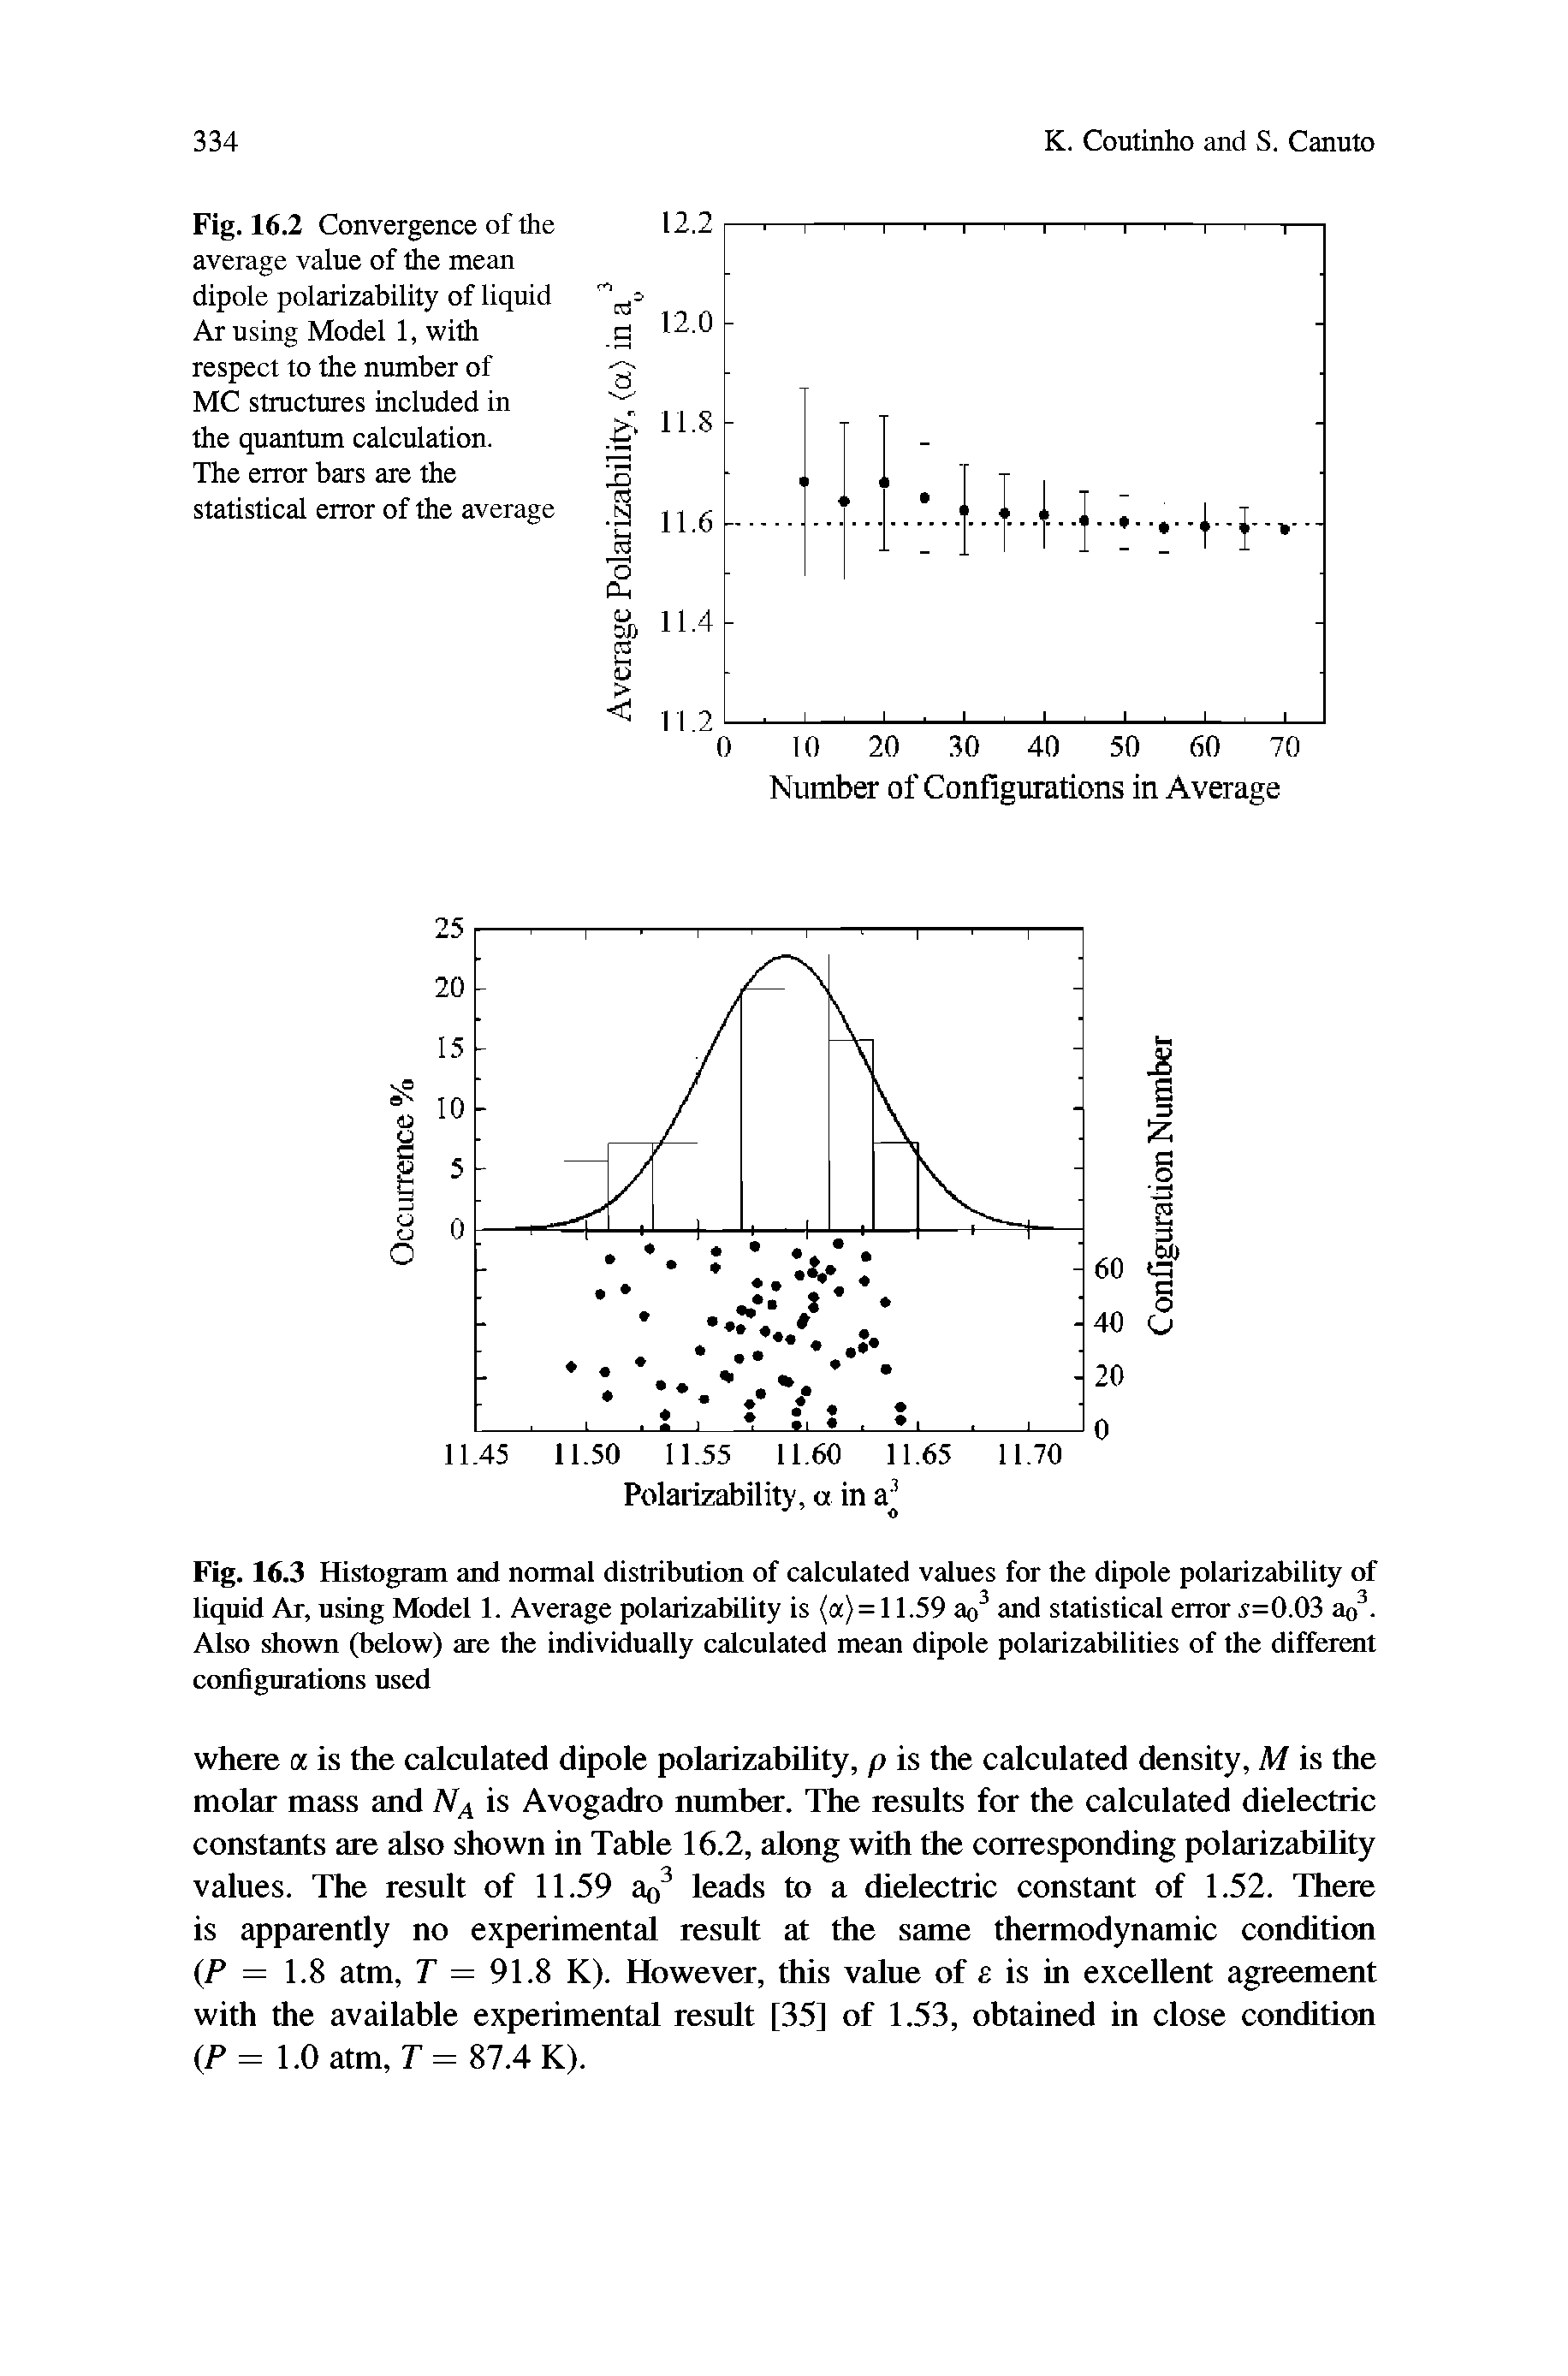 Fig. 16.3 Histogram and normal distribution of calculated values for the dipole polarizability of liquid Ar, using Model 1. Average polarizability is (a) = 11.59 ao3 and statistical error, v=0.03 ao3. Also shown (below) are the individually calculated mean dipole polarizabilities of the different configurations used...